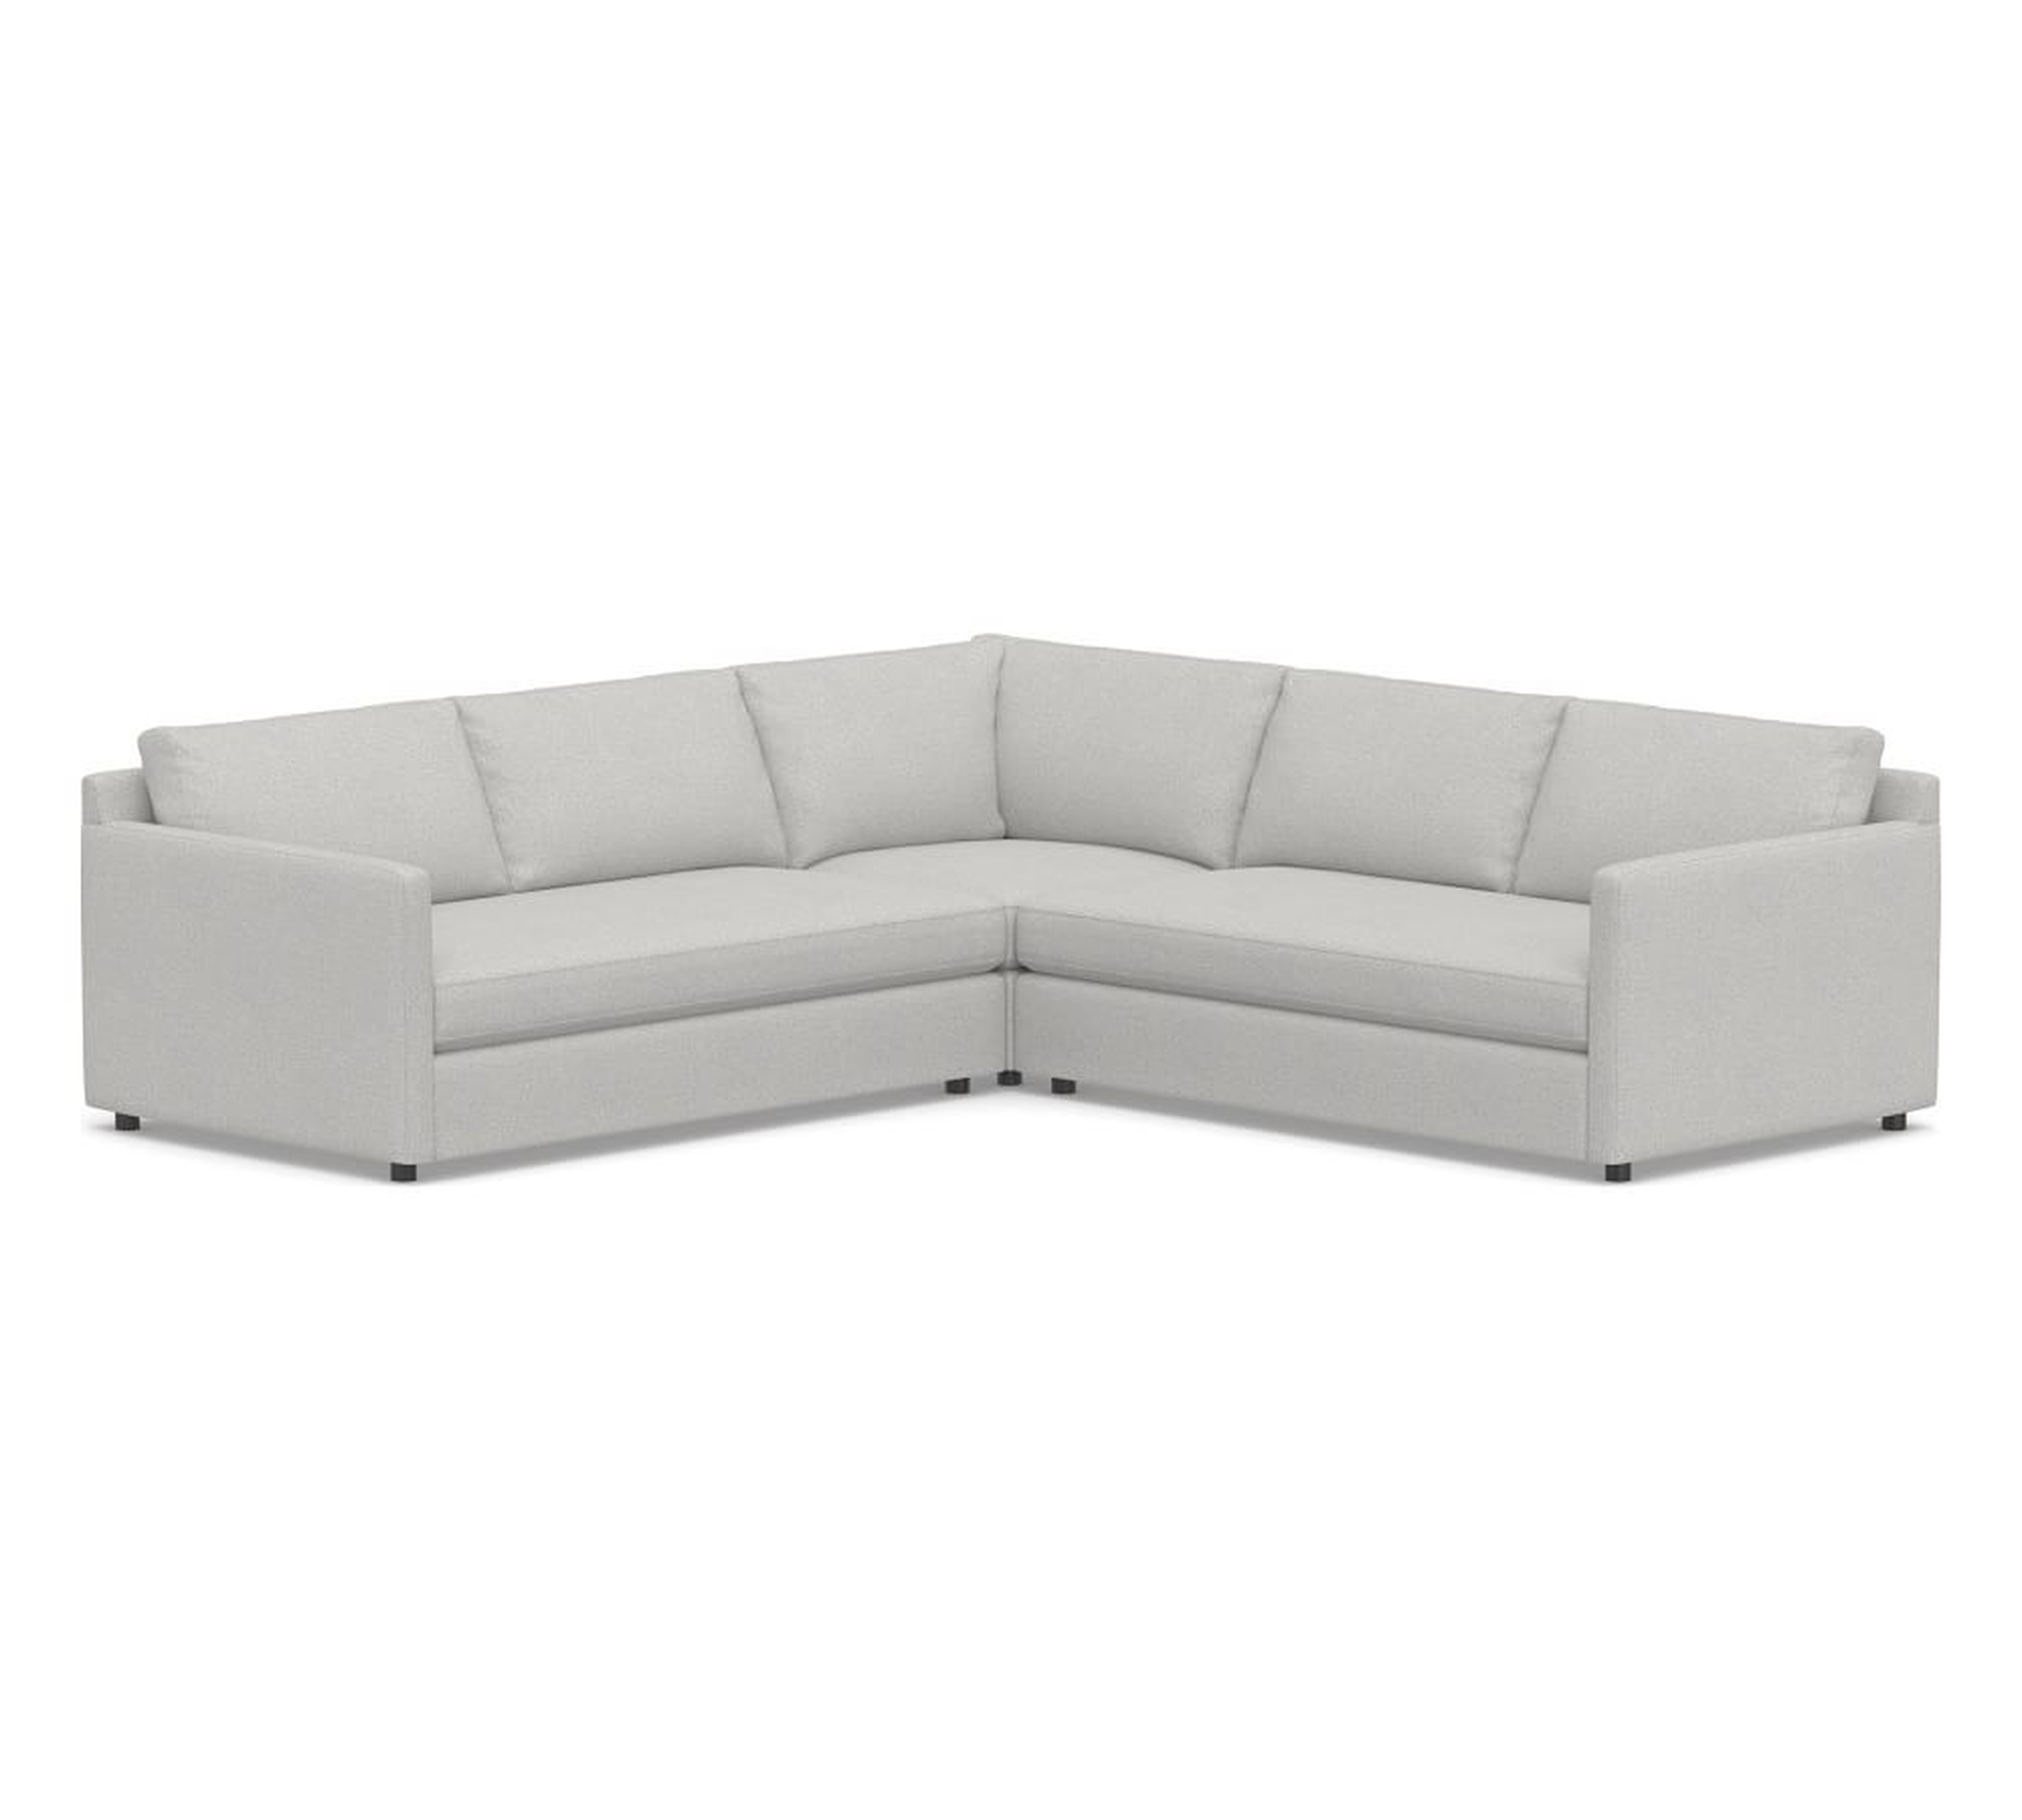 Pacifica Square Arm Upholstered 3-Piece L-Shaped Corner Sectional, Polyester Wrapped Cushions, Park Weave Ash - Pottery Barn